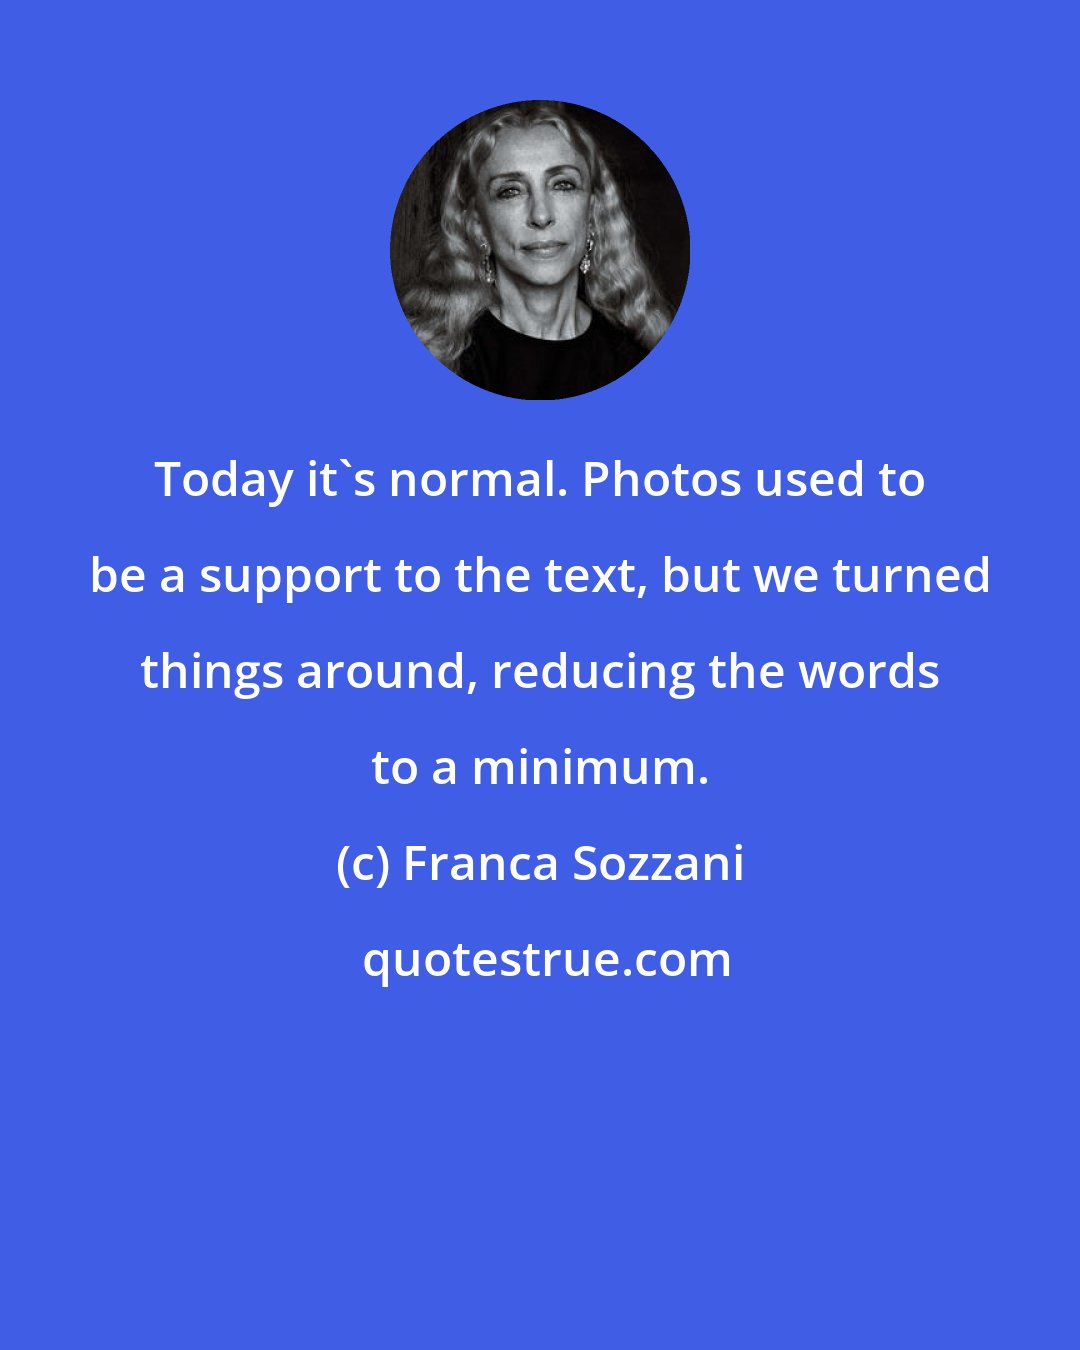 Franca Sozzani: Today it's normal. Photos used to be a support to the text, but we turned things around, reducing the words to a minimum.